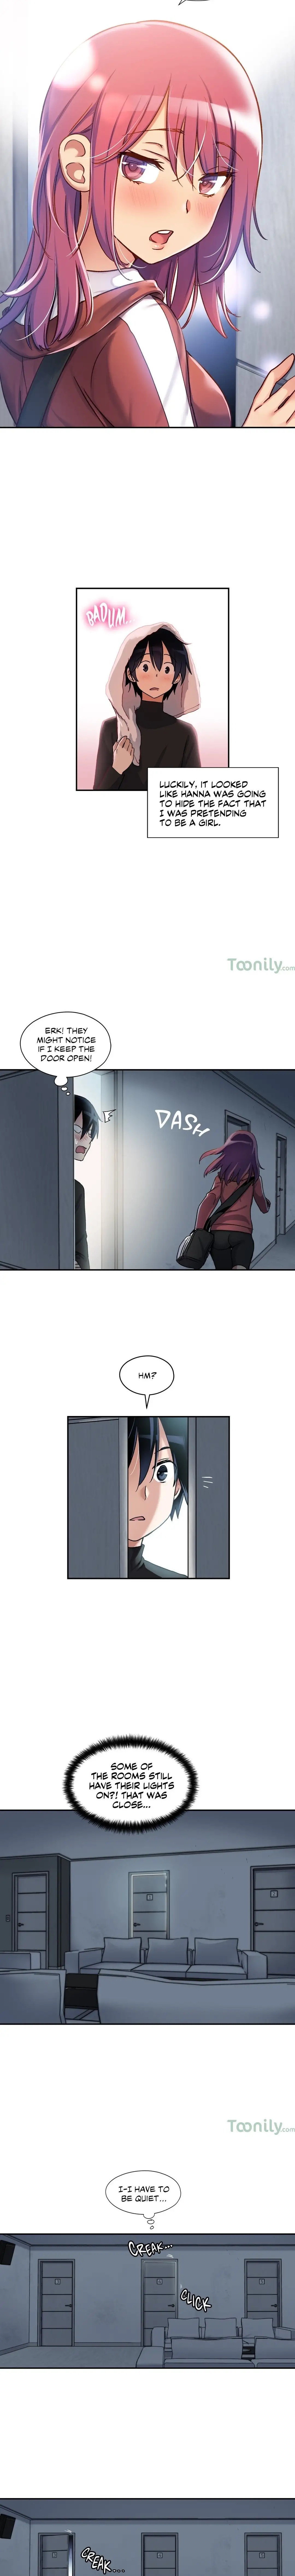 Under Observation My First Loves and I - Chapter 6 Page 9